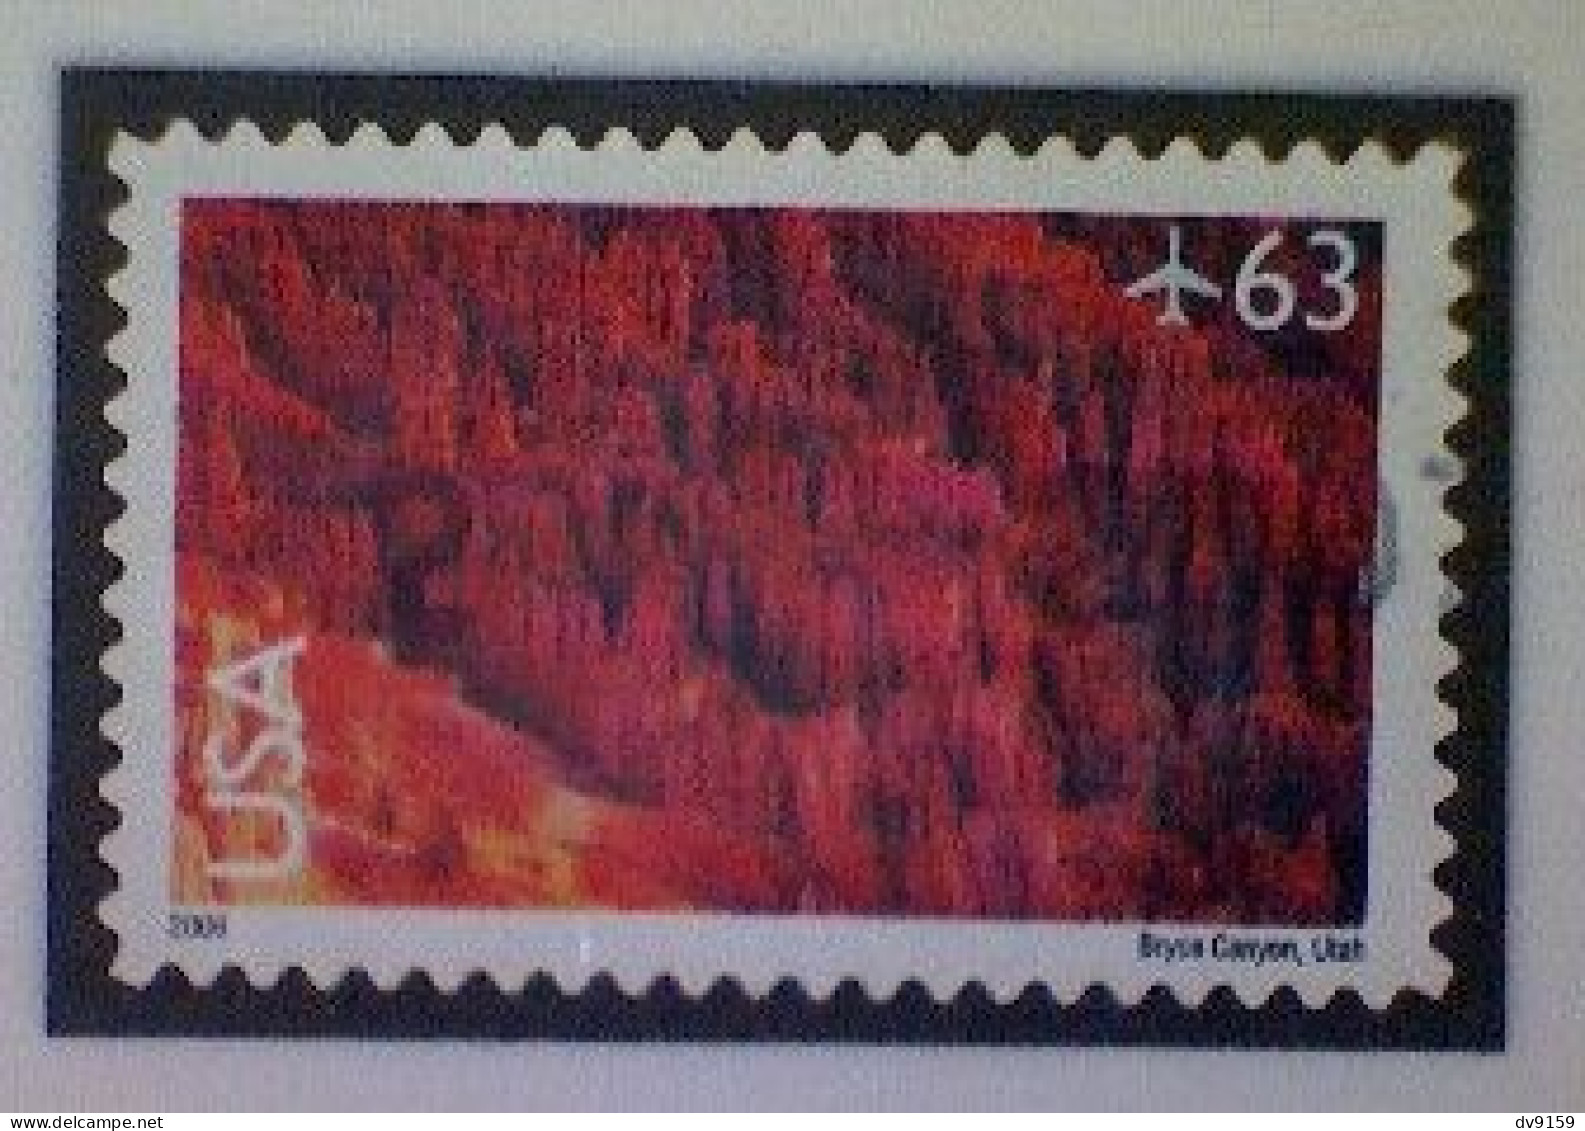 United States, Scott #C139, Used(o), 2006, Bryce Canyon, 63¢, Multicolored In Reds - 3a. 1961-… Used